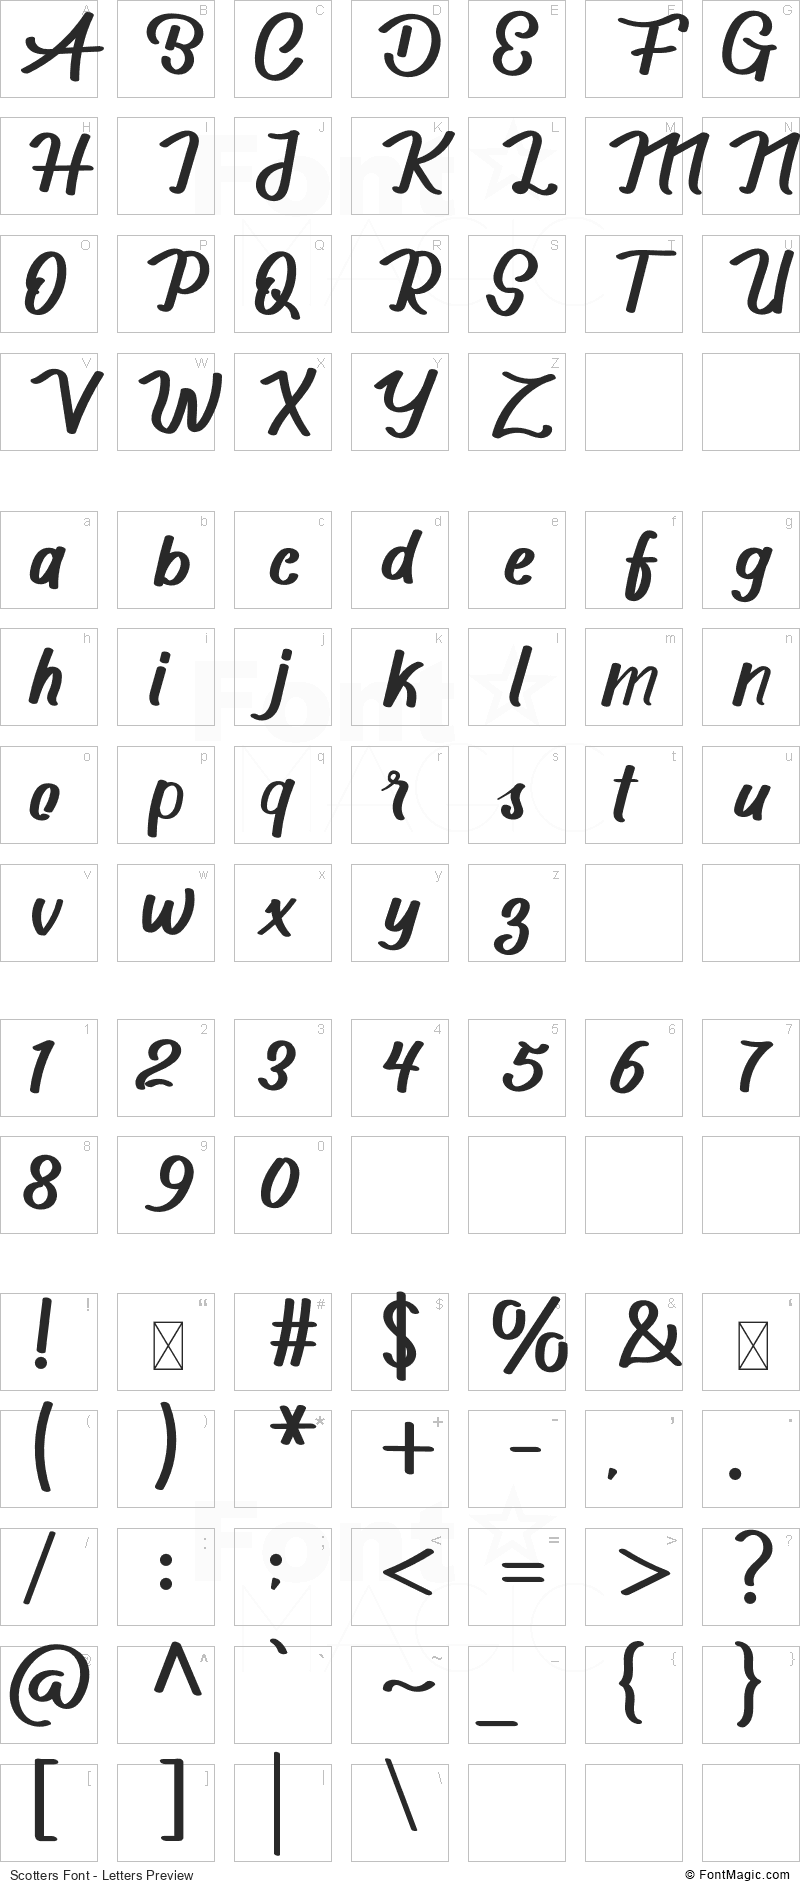 Scotters Font - All Latters Preview Chart